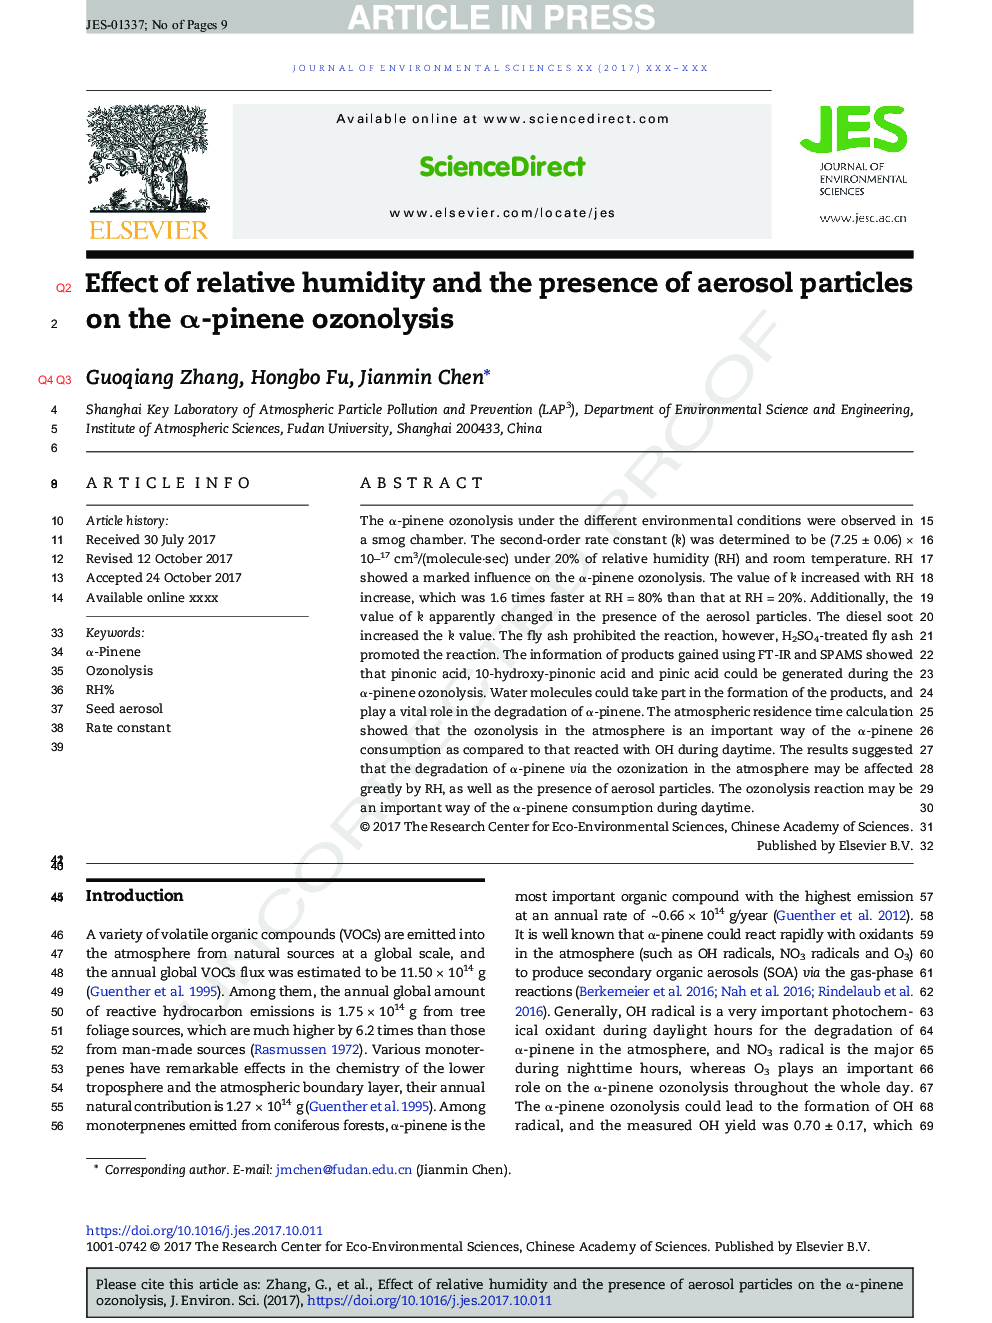 Effect of relative humidity and the presence of aerosol particles on the Î±-pinene ozonolysis